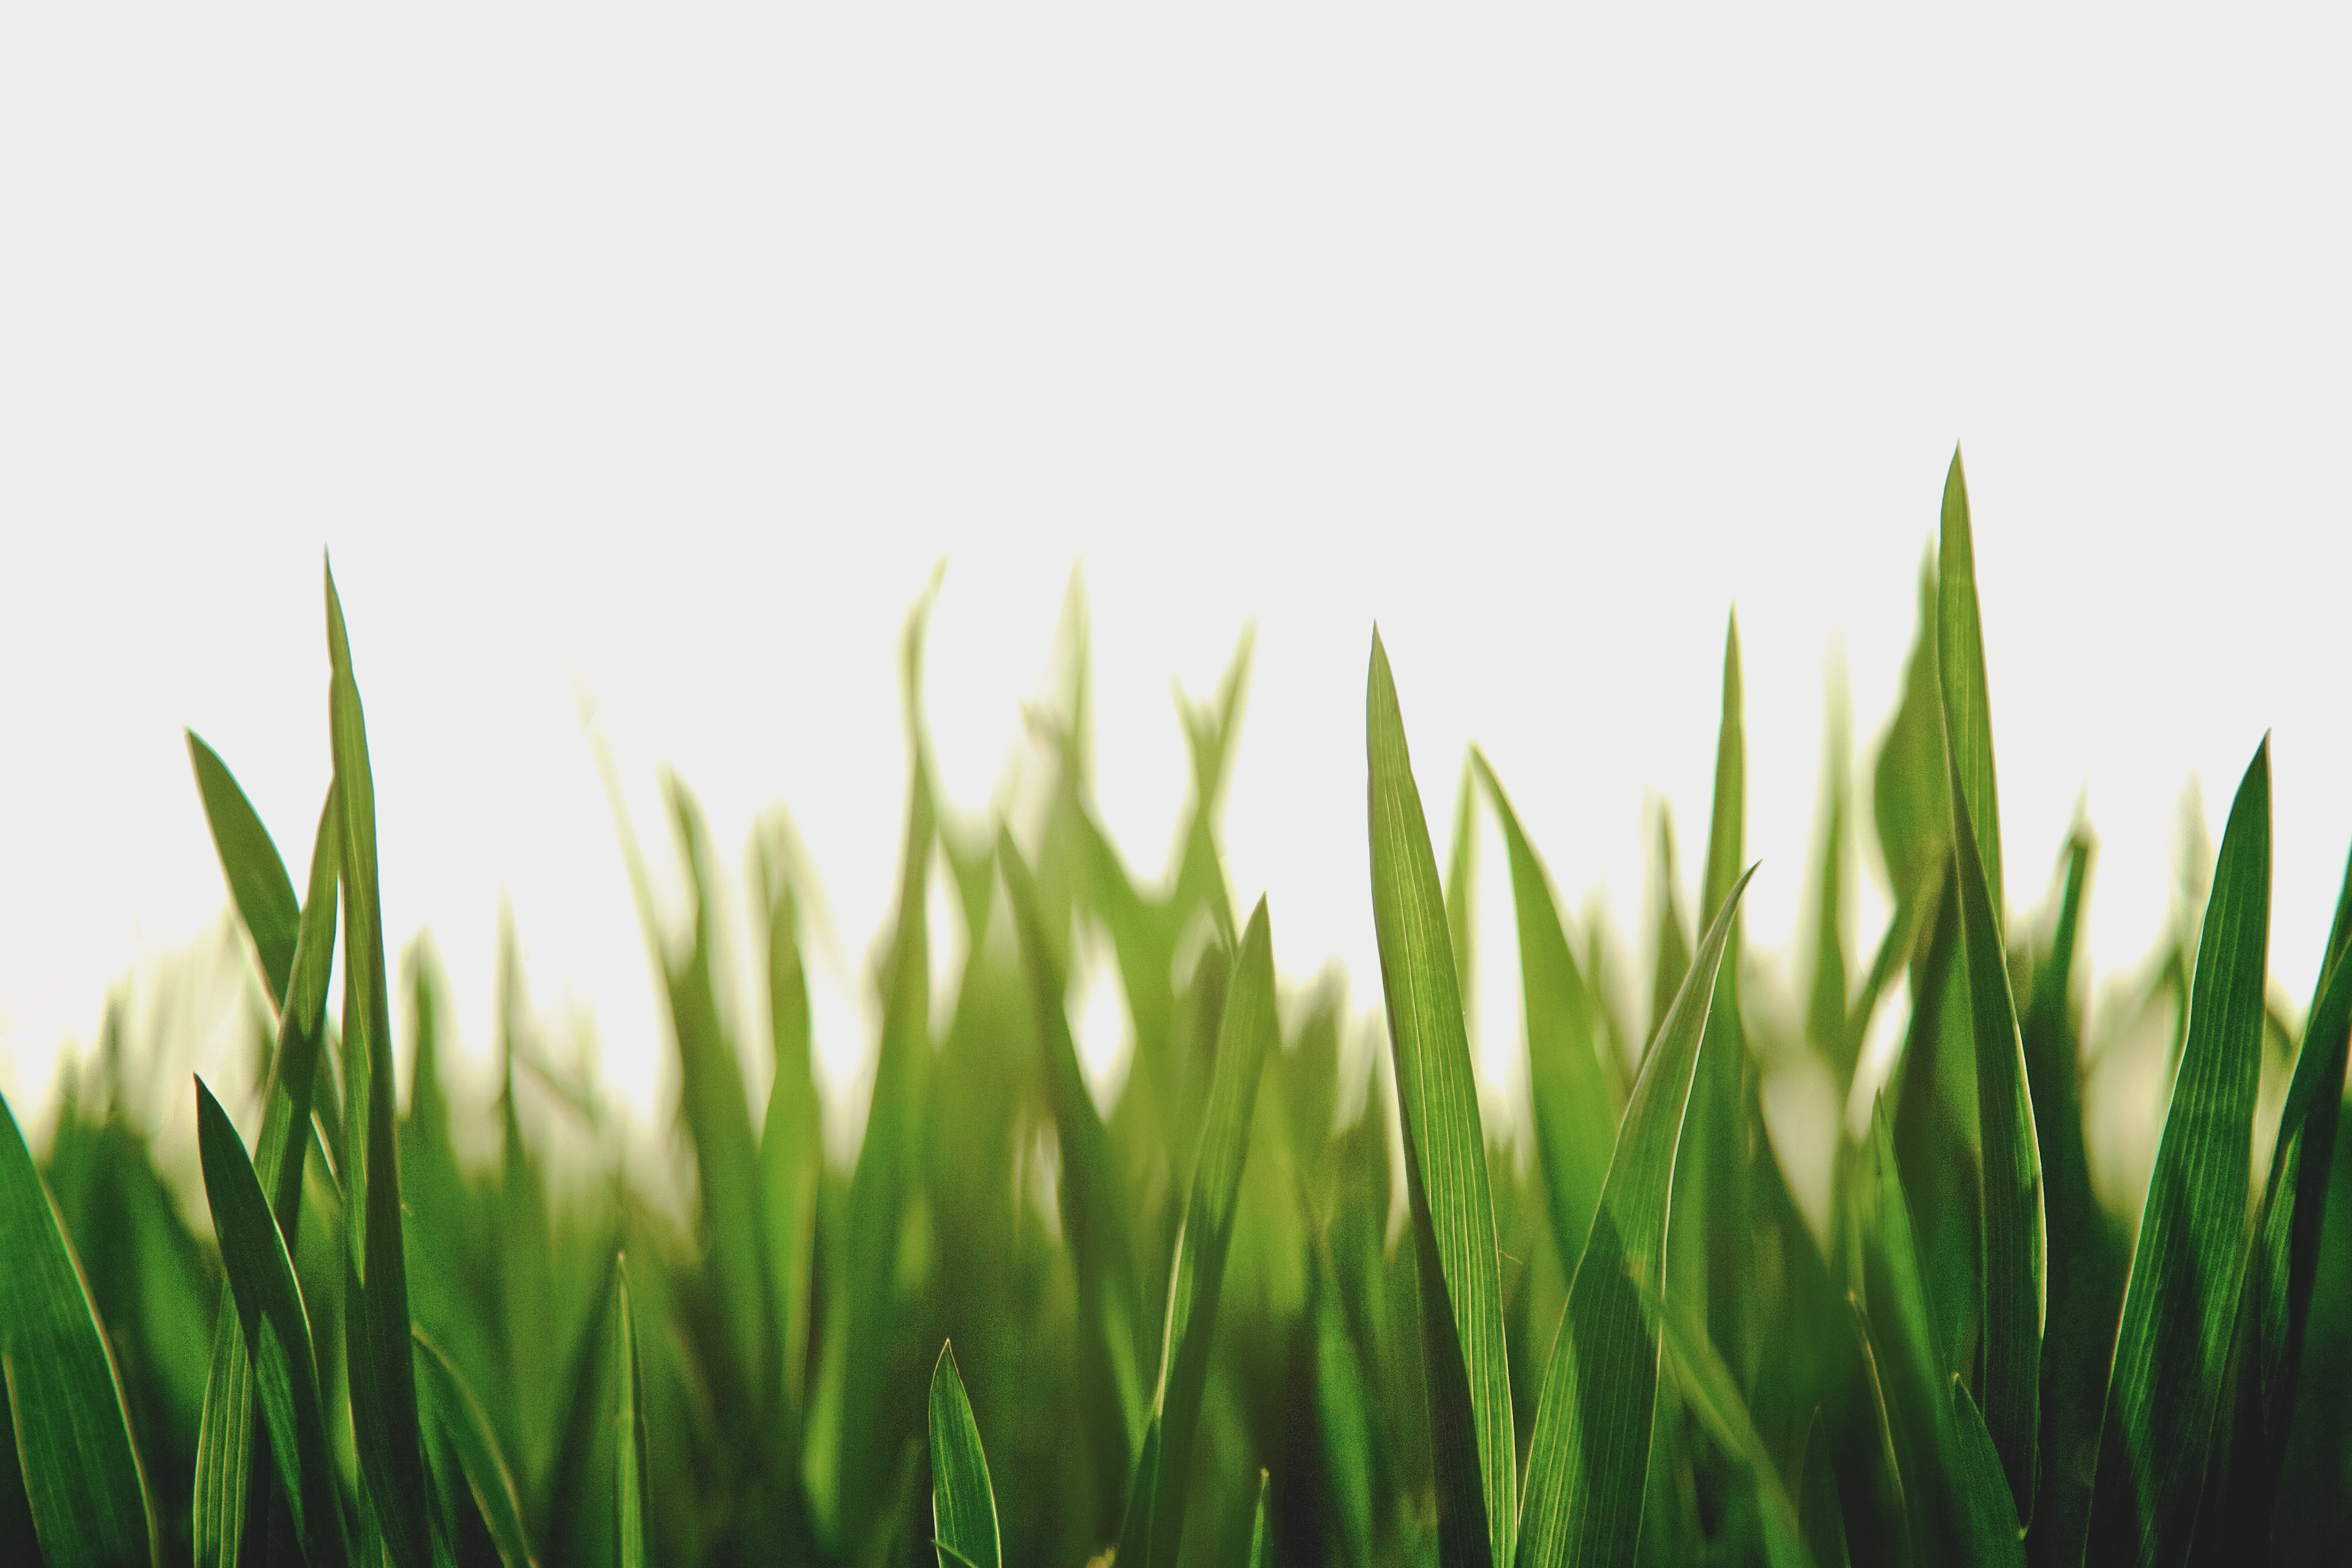 Overpayment scam targets turf companies